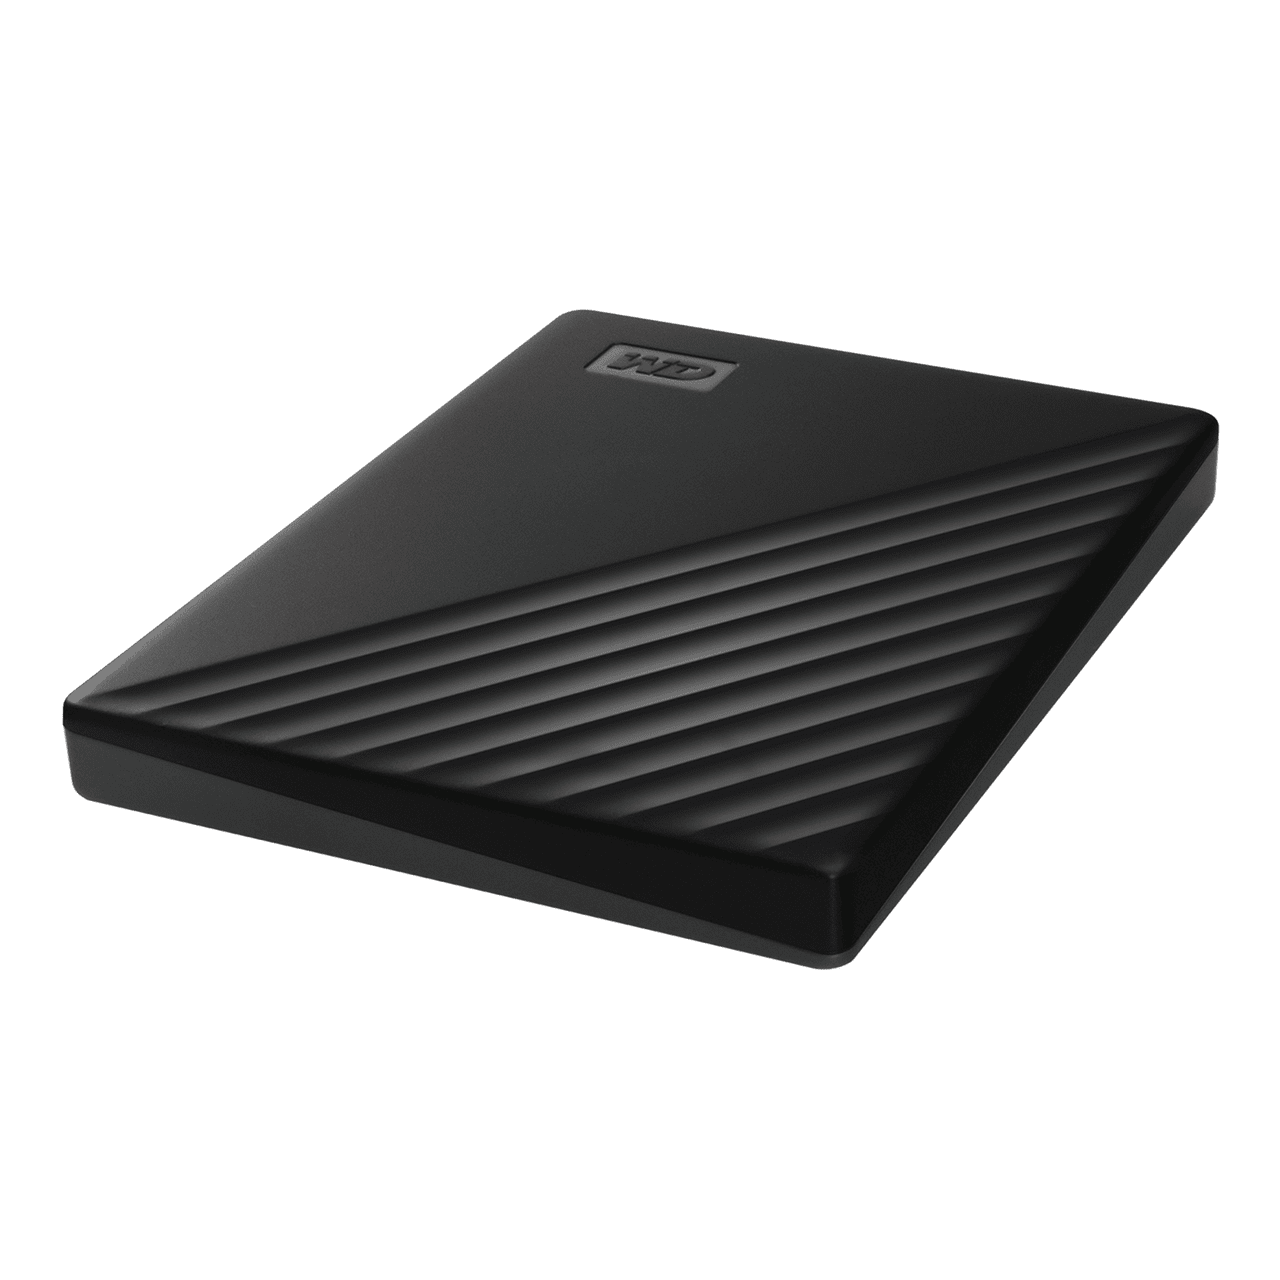 WD Western Digital My Passport  2TB ( BLACK ) Slim Portable External Hard Disk USB 3.0 With WD Backup Software & Password Protection